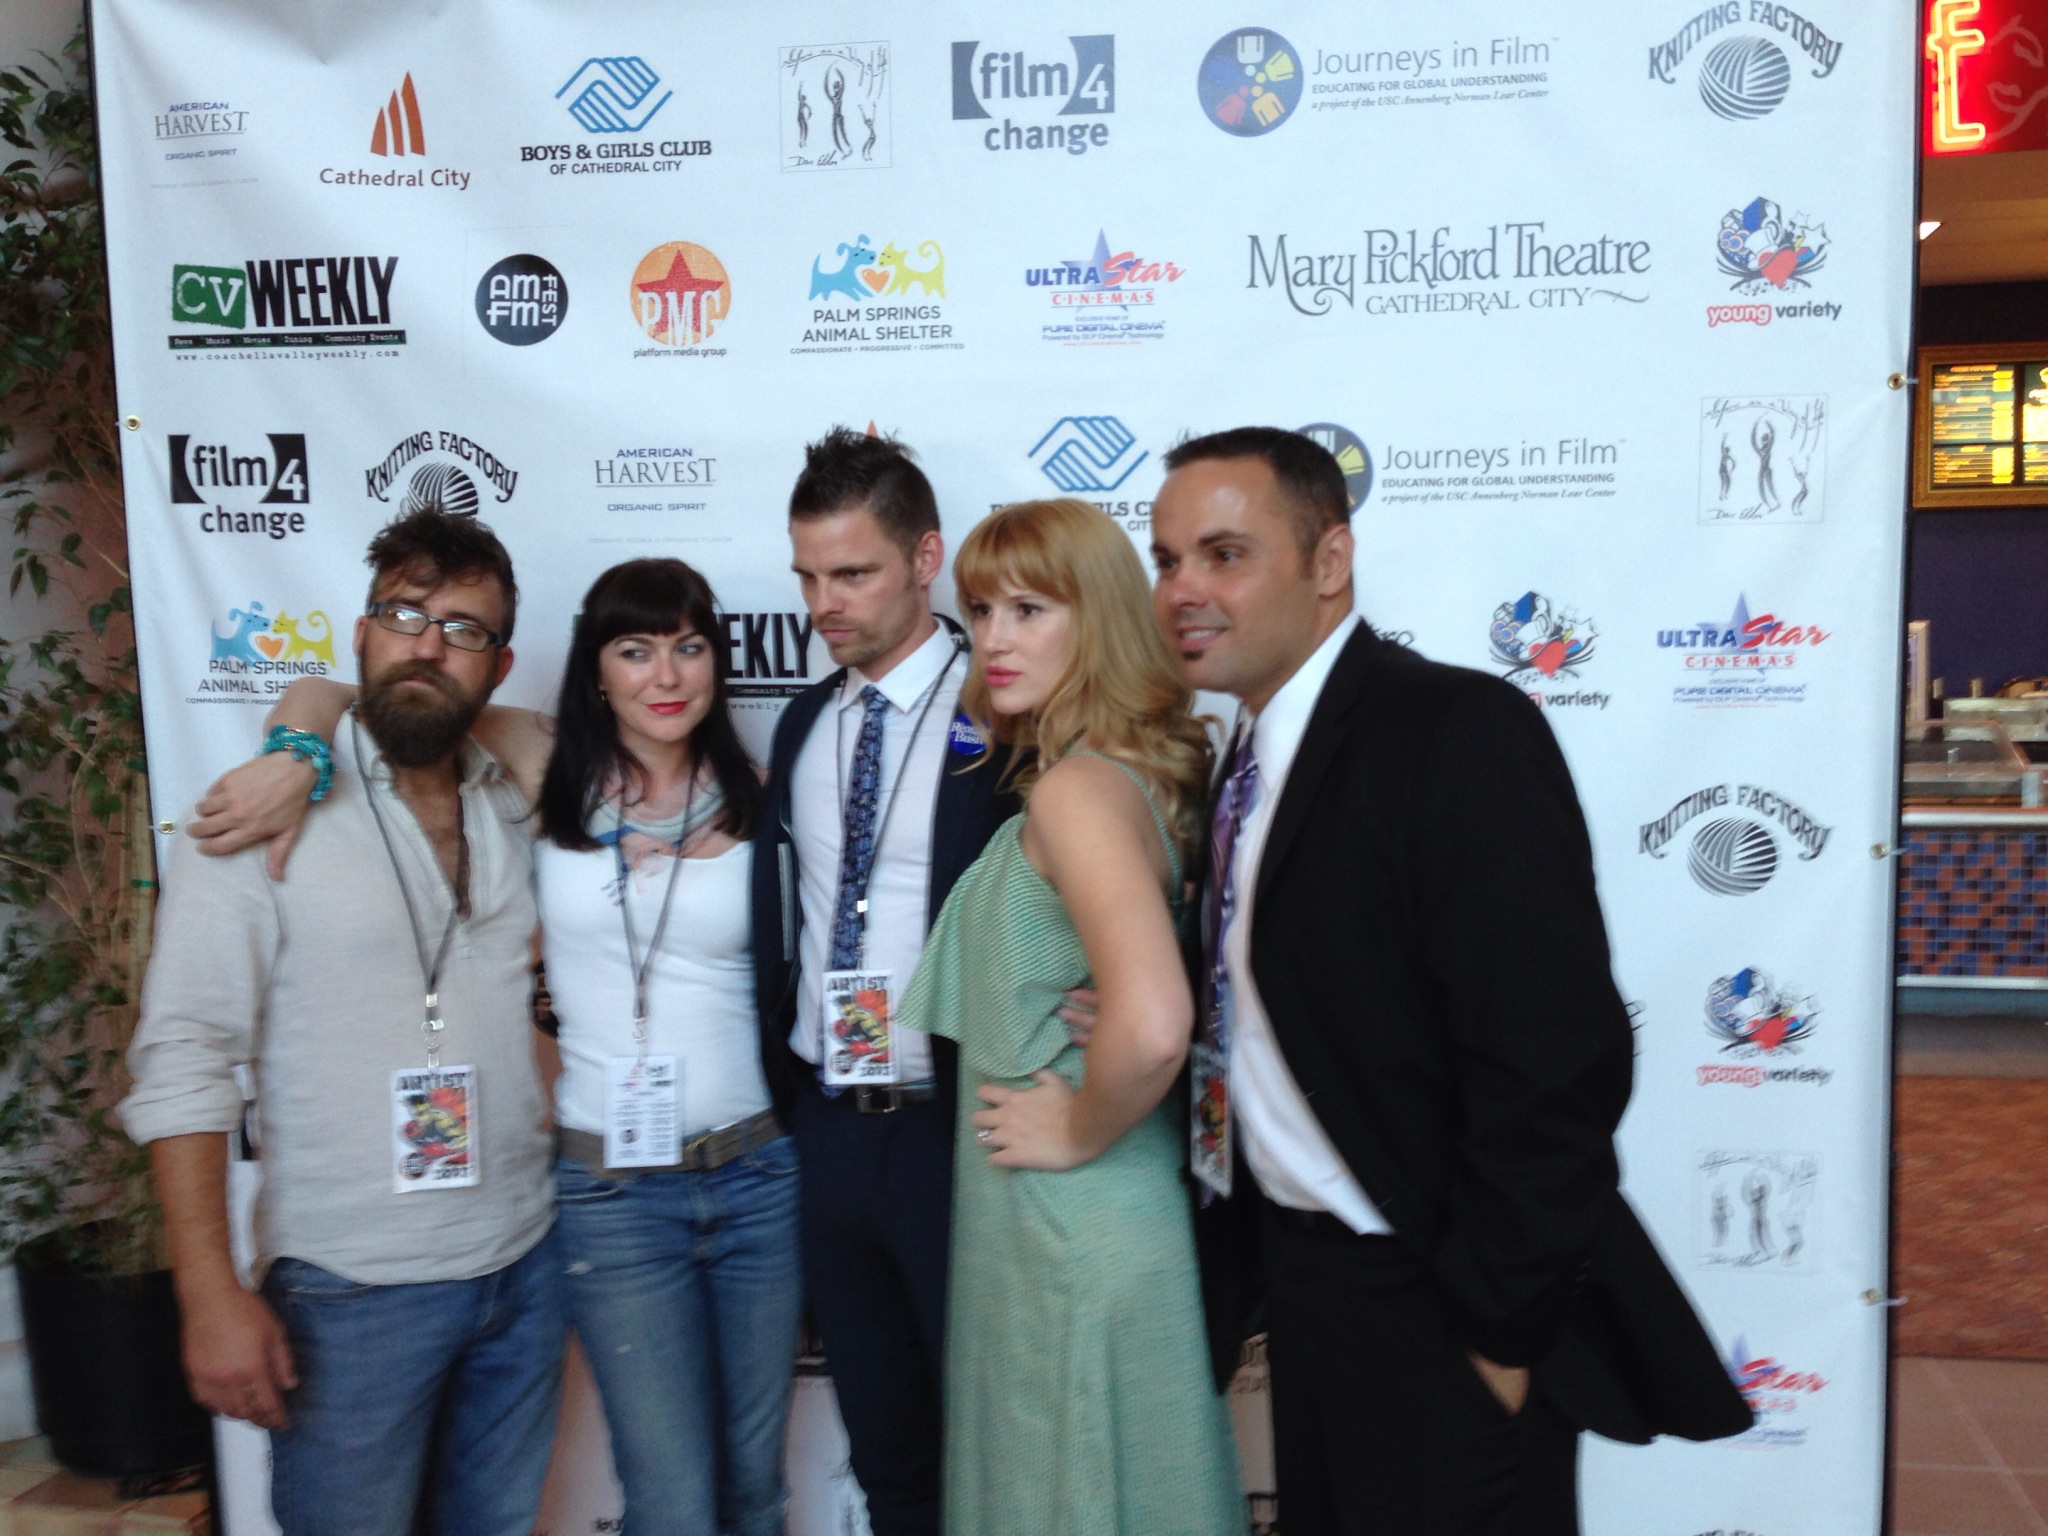 Rabid Love festival premiere at the first annual AMFM festival in Cathedral City California. 2013 with John KD Graham, Alexandra Boylan, Paul J Porter, Lance Ziesch